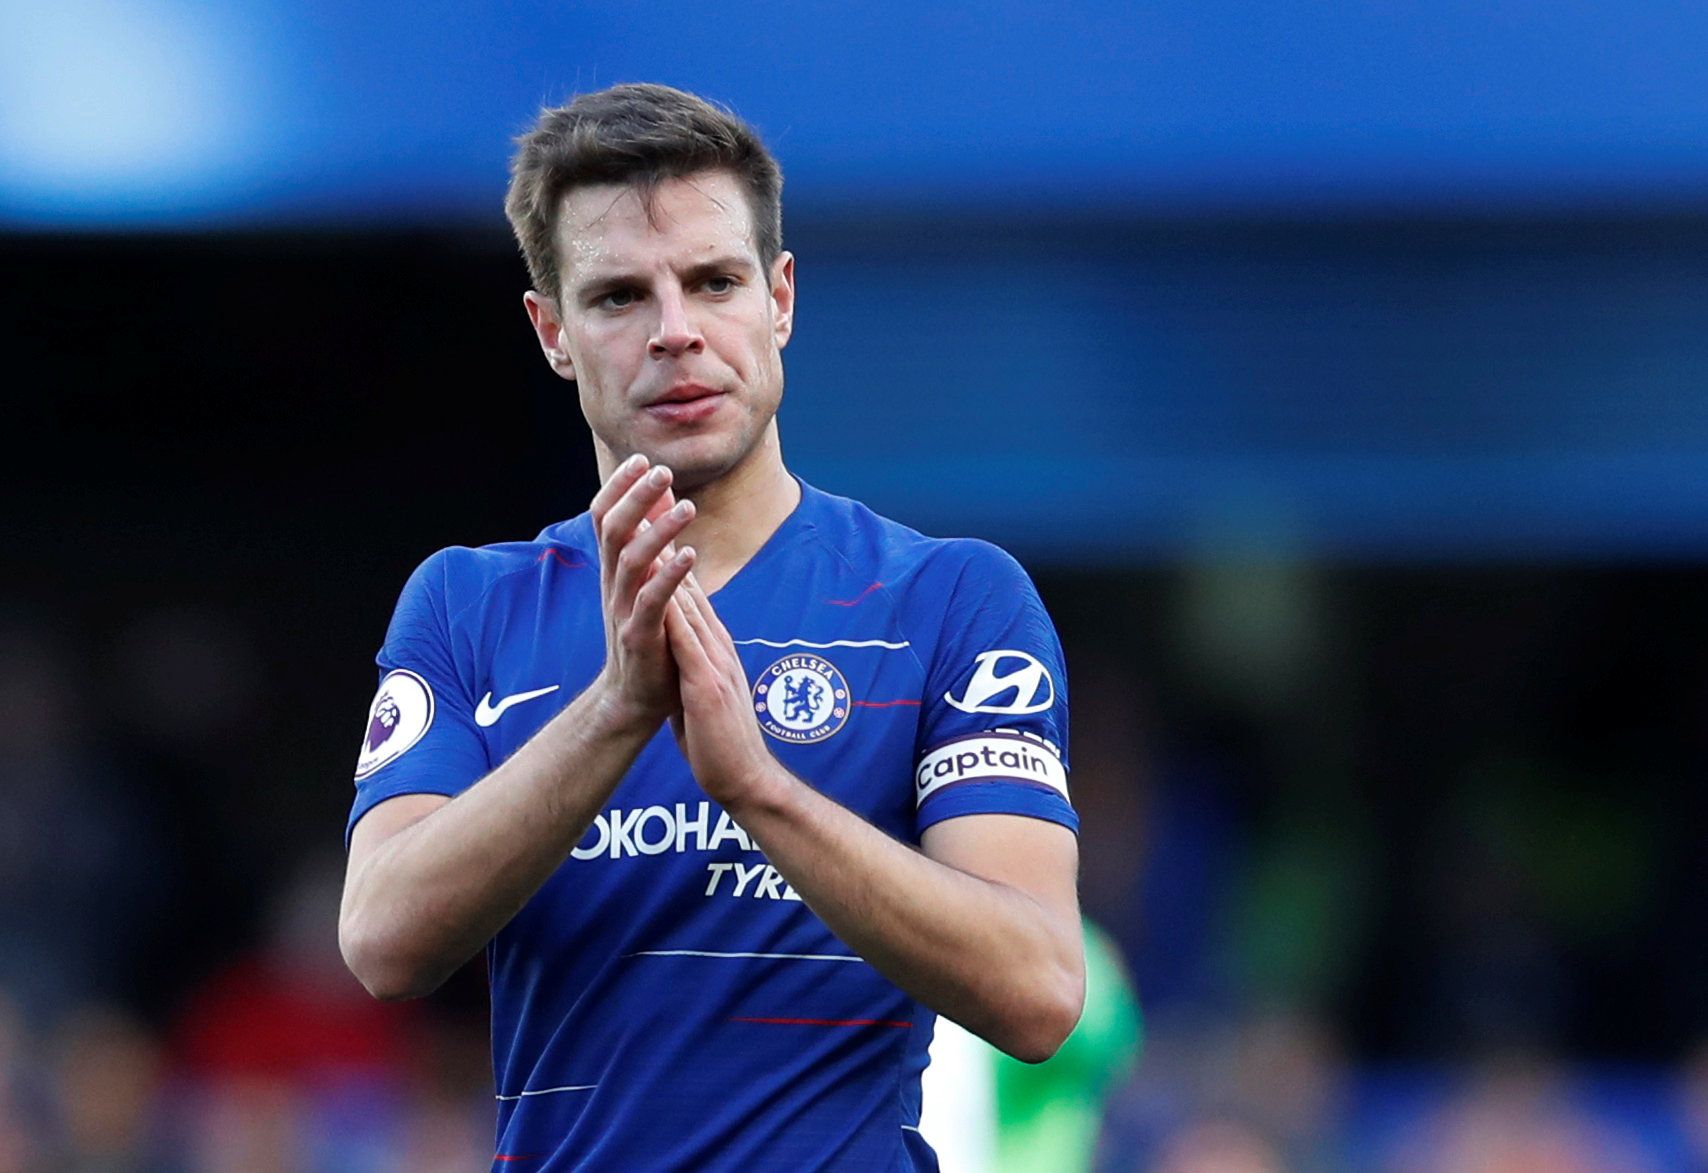 Soccer Football - Premier League - Chelsea v Wolverhampton Wanderers - Stamford Bridge, London, Britain - March 10, 2019  Chelsea's Cesar Azpilicueta applauds fans after the match    REUTERS/David Klein  EDITORIAL USE ONLY. No use with unauthorized audio, video, data, fixture lists, club/league logos or "live" services. Online in-match use limited to 75 images, no video emulation. No use in betting, games or single club/league/player publications.  Please contact your account representative for 